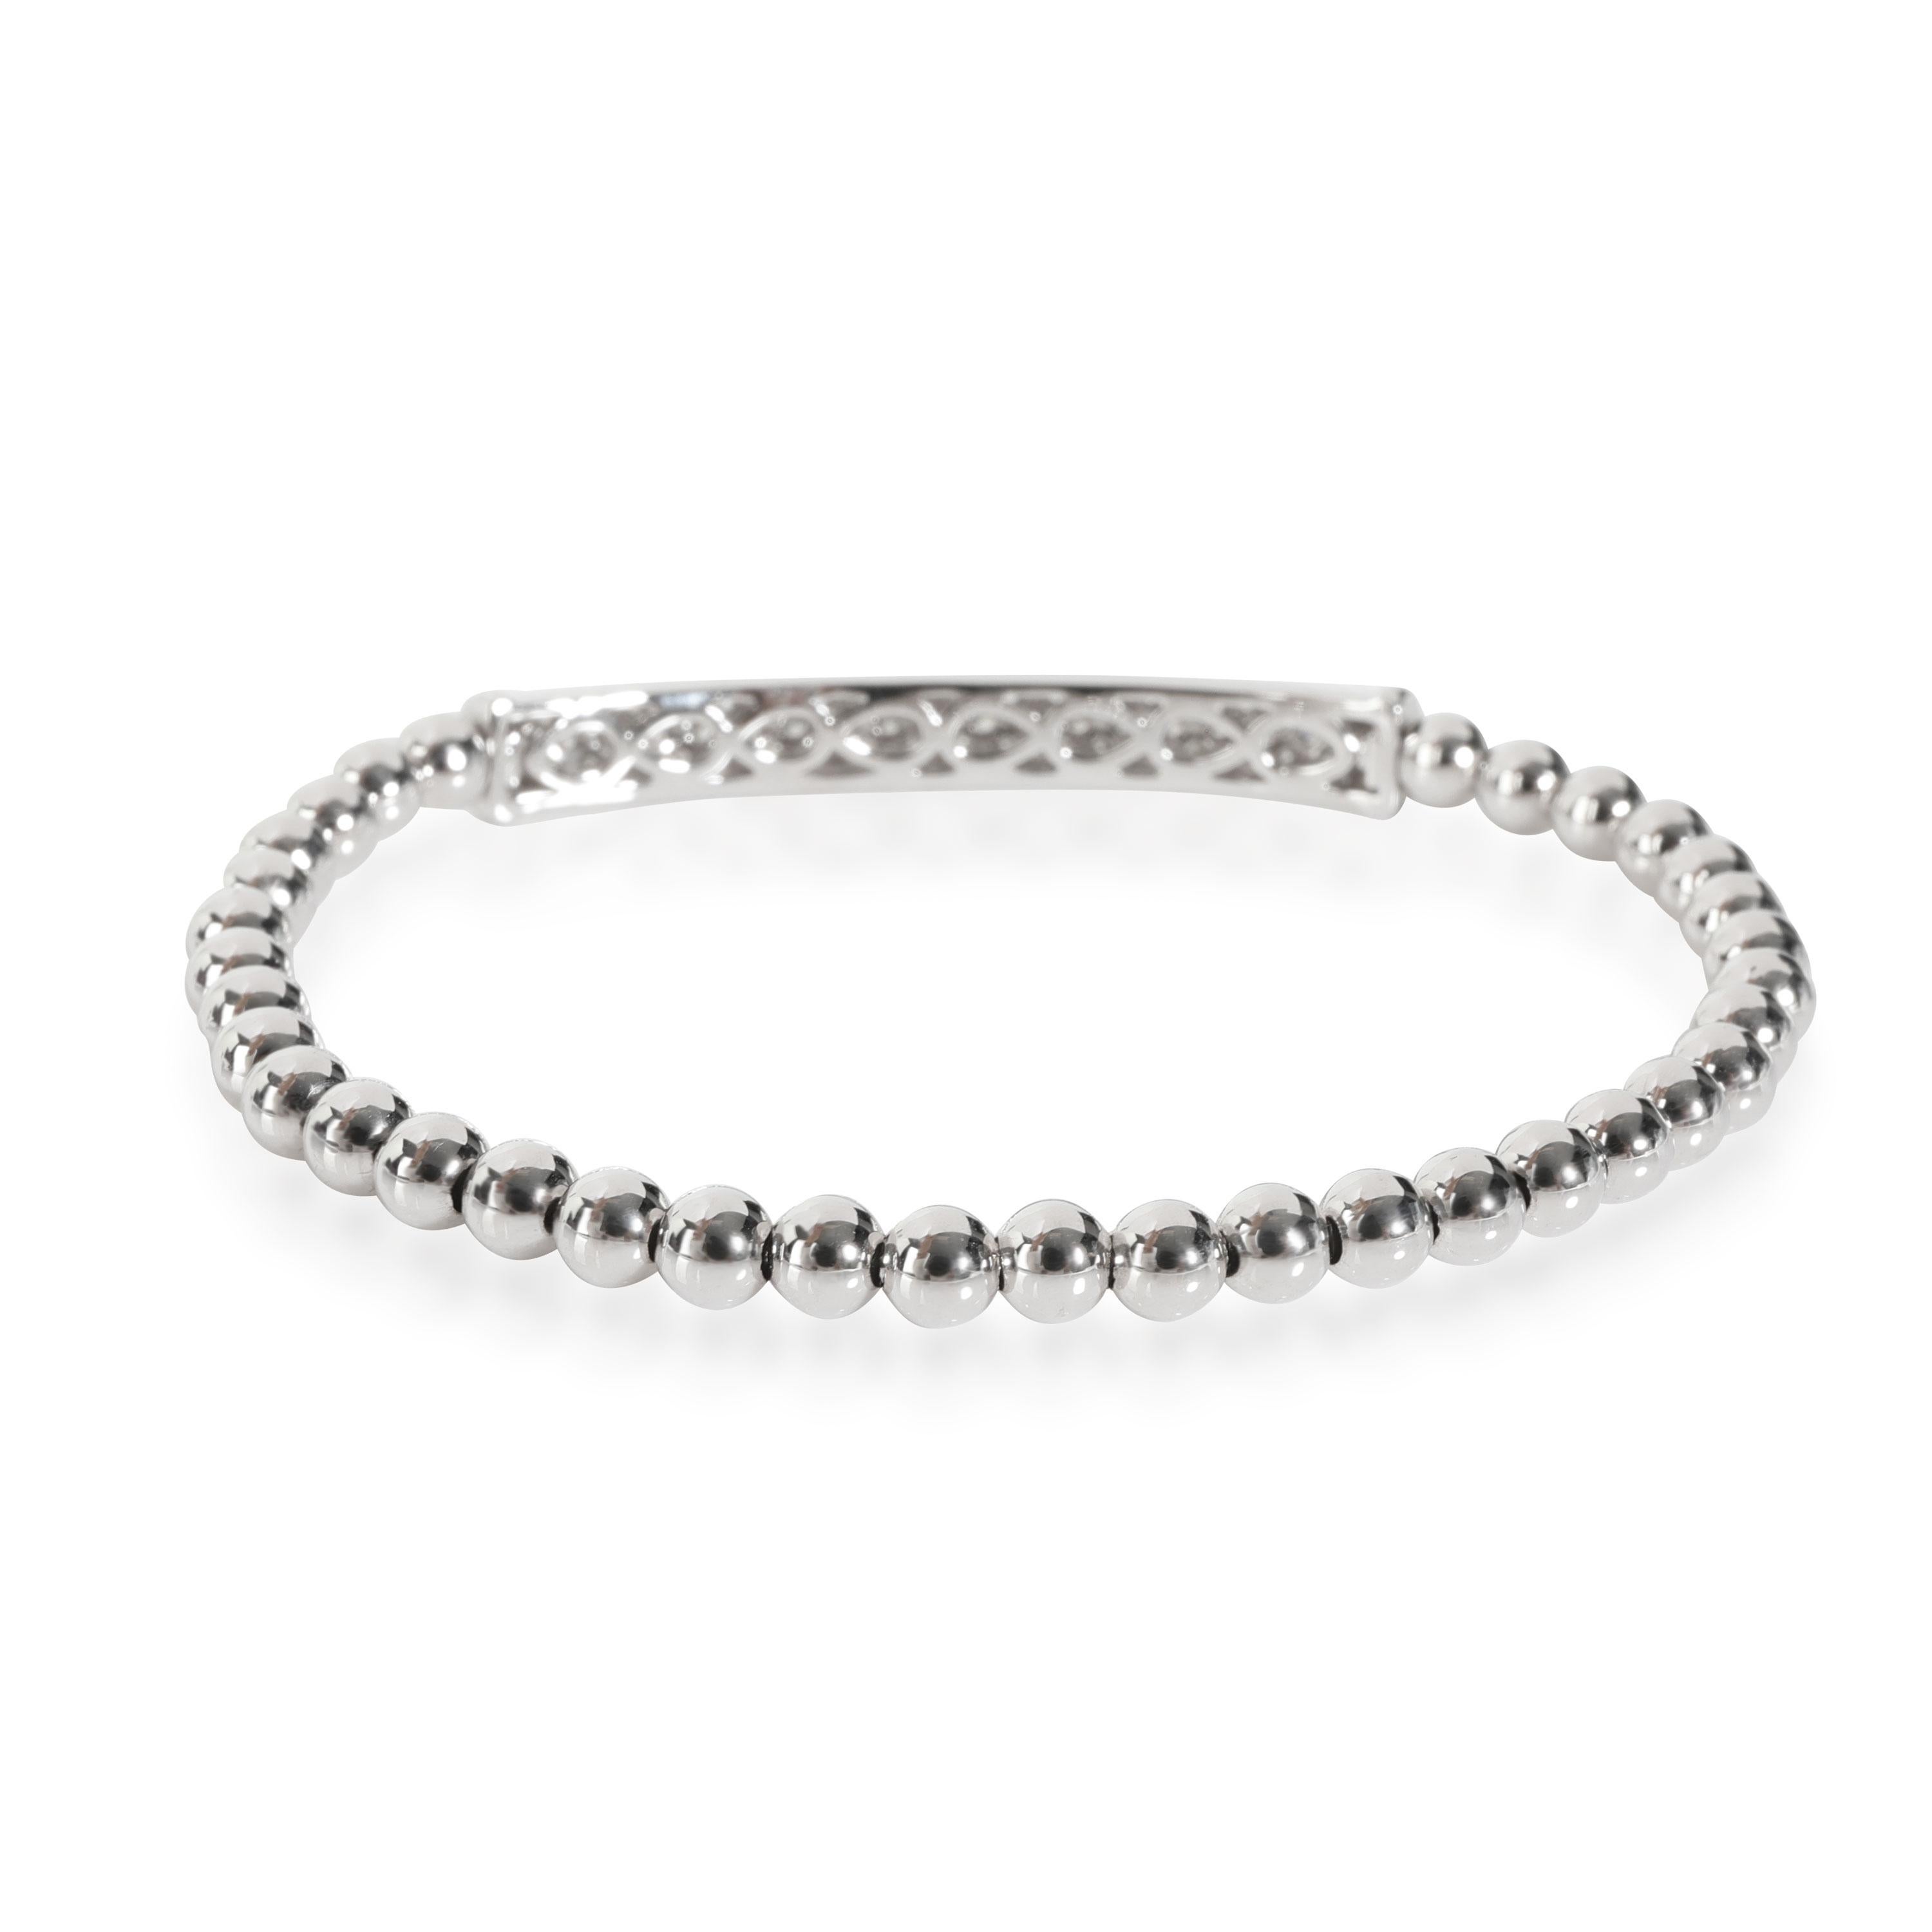 Pave Diamond Bead Bracelet in 14K White Gold 1.16 CTW

PRIMARY DETAILS
SKU: 111707
Listing Title: Pave Diamond Bead Bracelet in 14K White Gold 1.16 CTW
Condition Description: Retails for 4655 USD. In excellent condition. Bracelet is 6.25 inches in